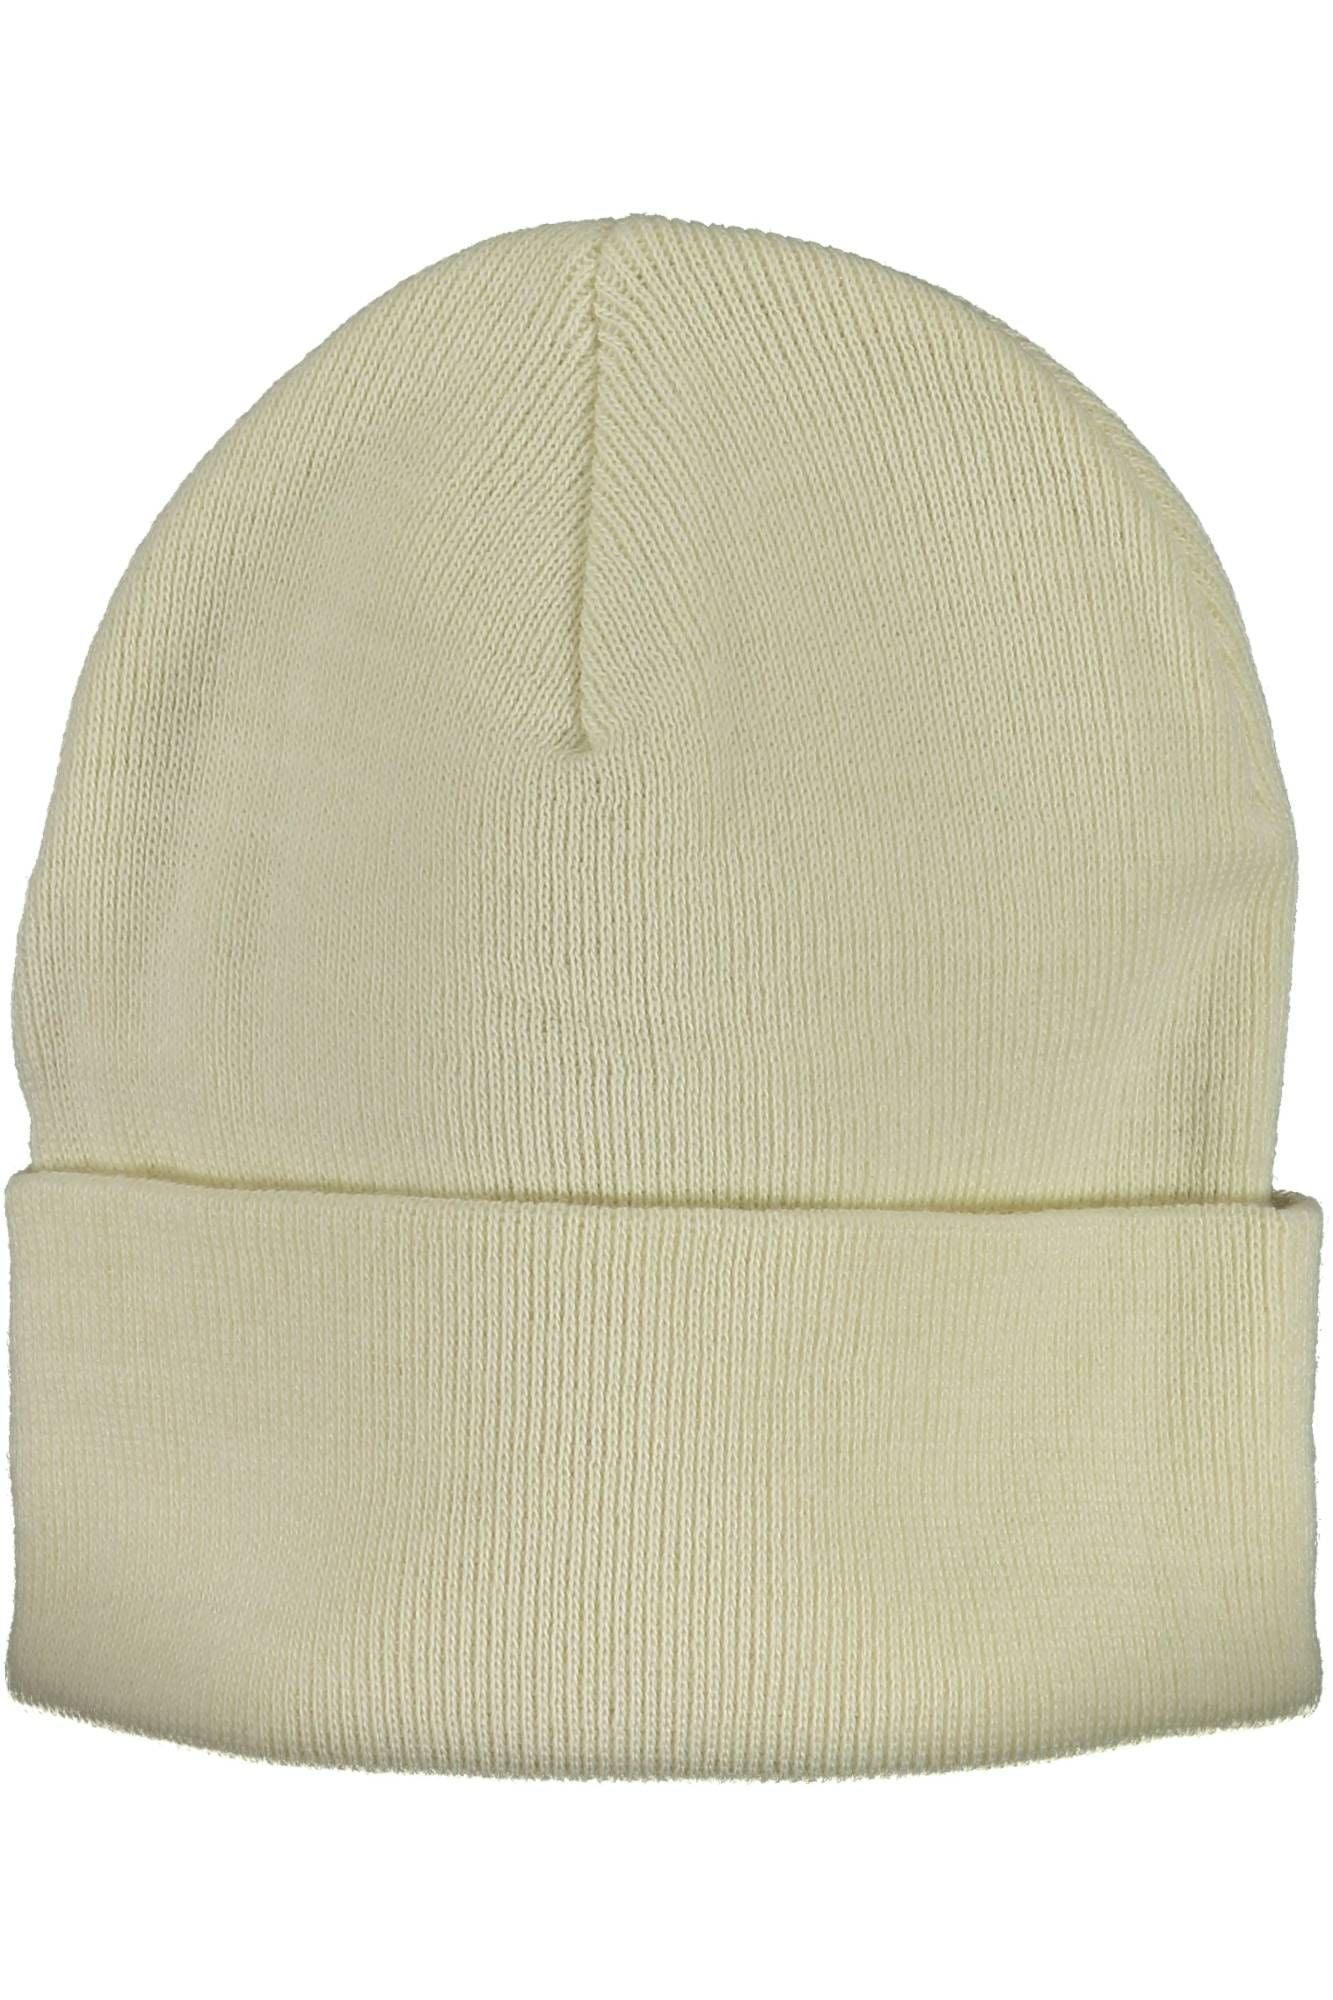 Levi's Embroidered Logo White Cap - Timeless Style